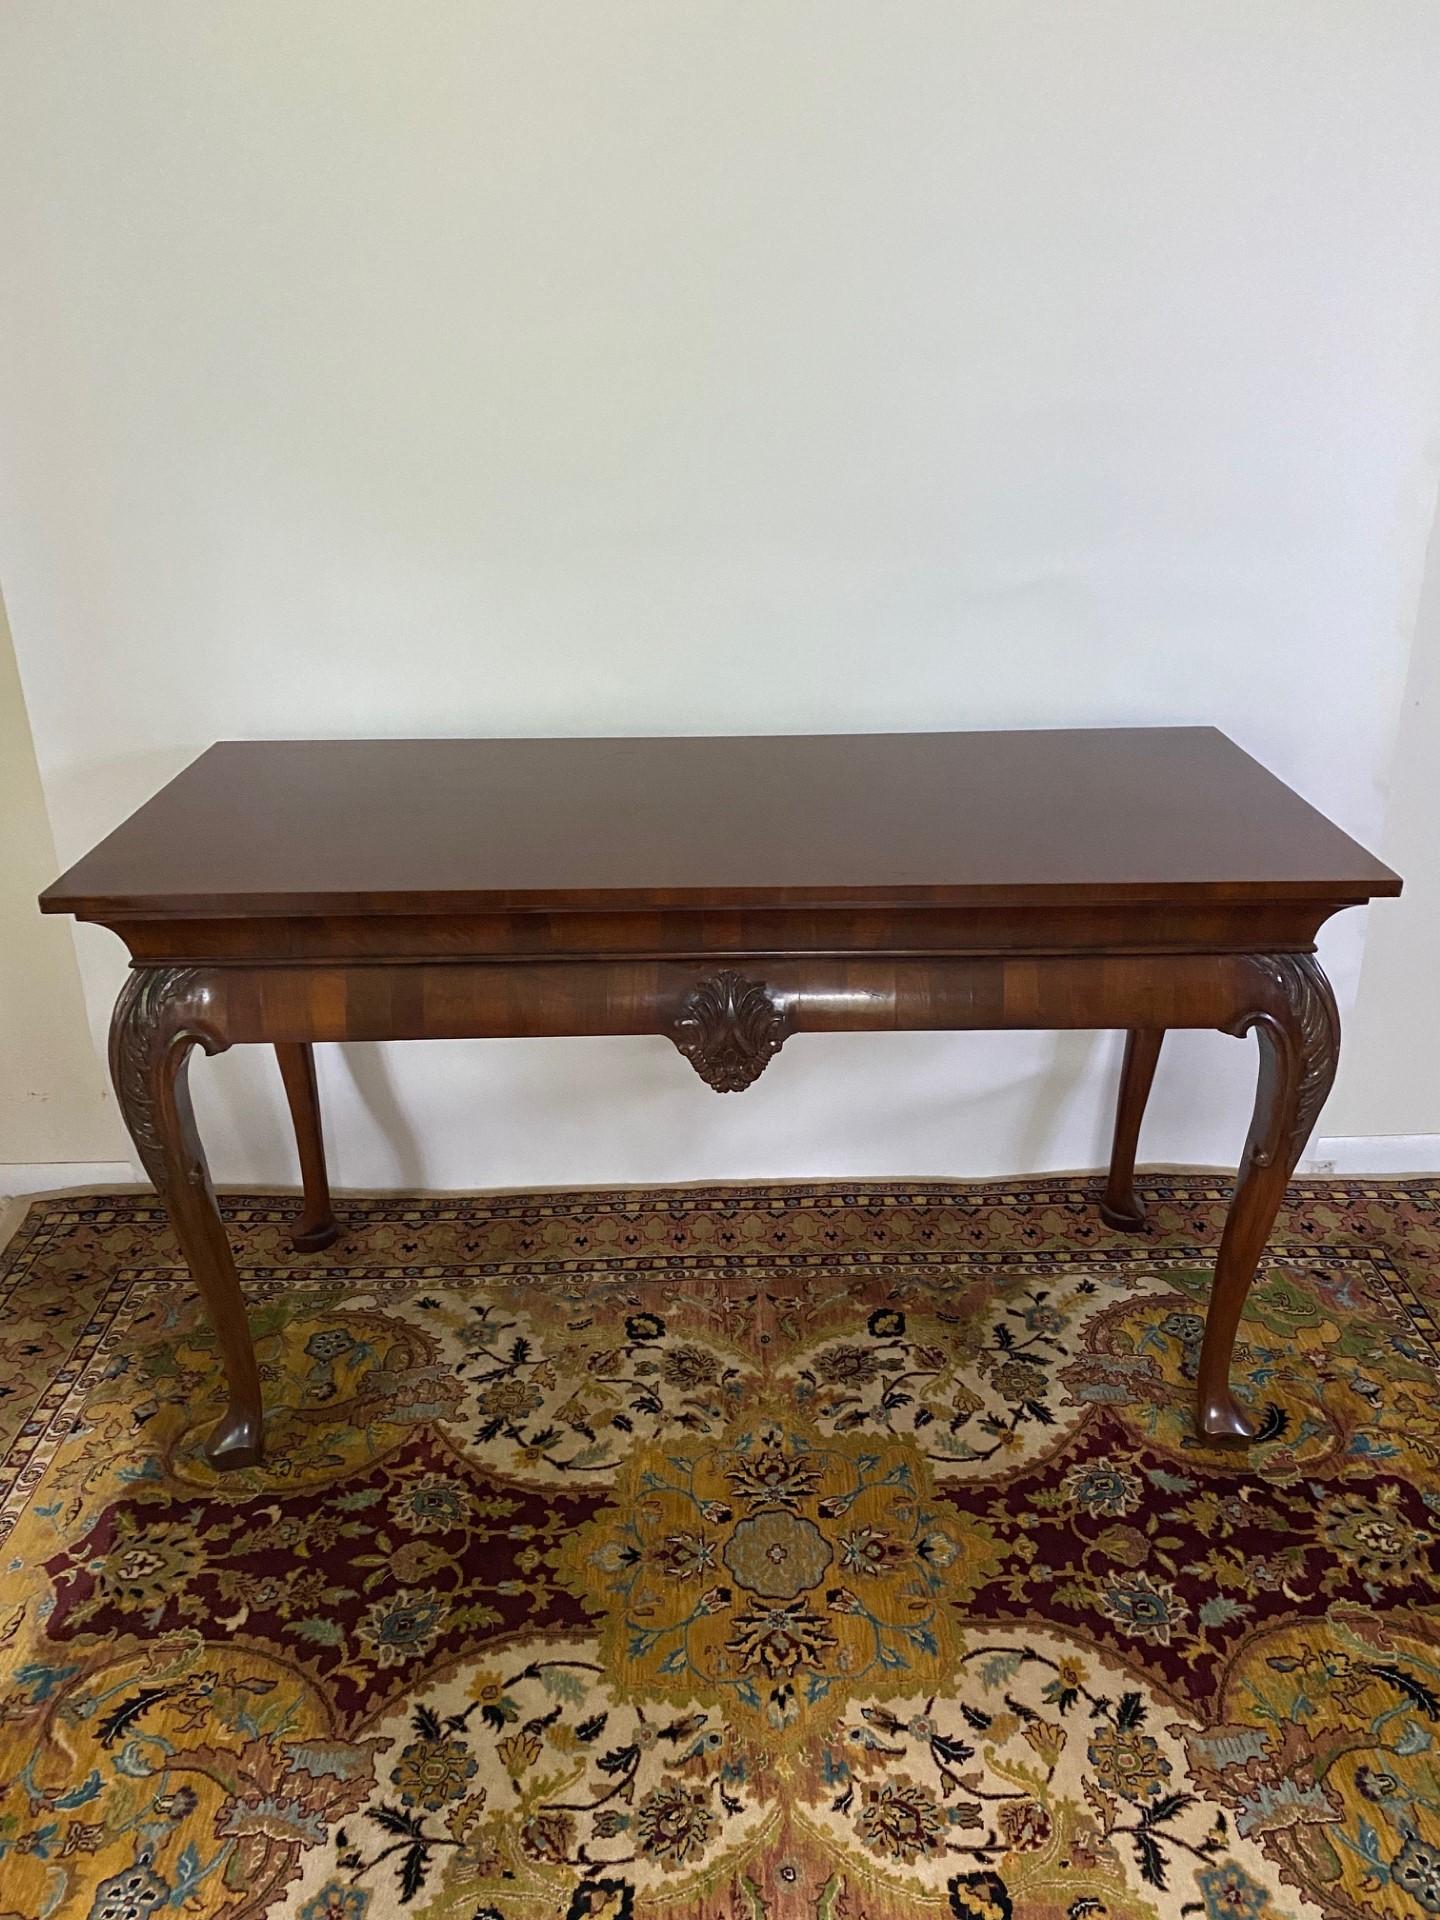 This English bench-made early Georgian style Walnut Side Table is a remarkable piece of furniture that embodies the elegance and charm of the Georgian era. Crafted with meticulous attention to detail, this side table showcases the timeless beauty of